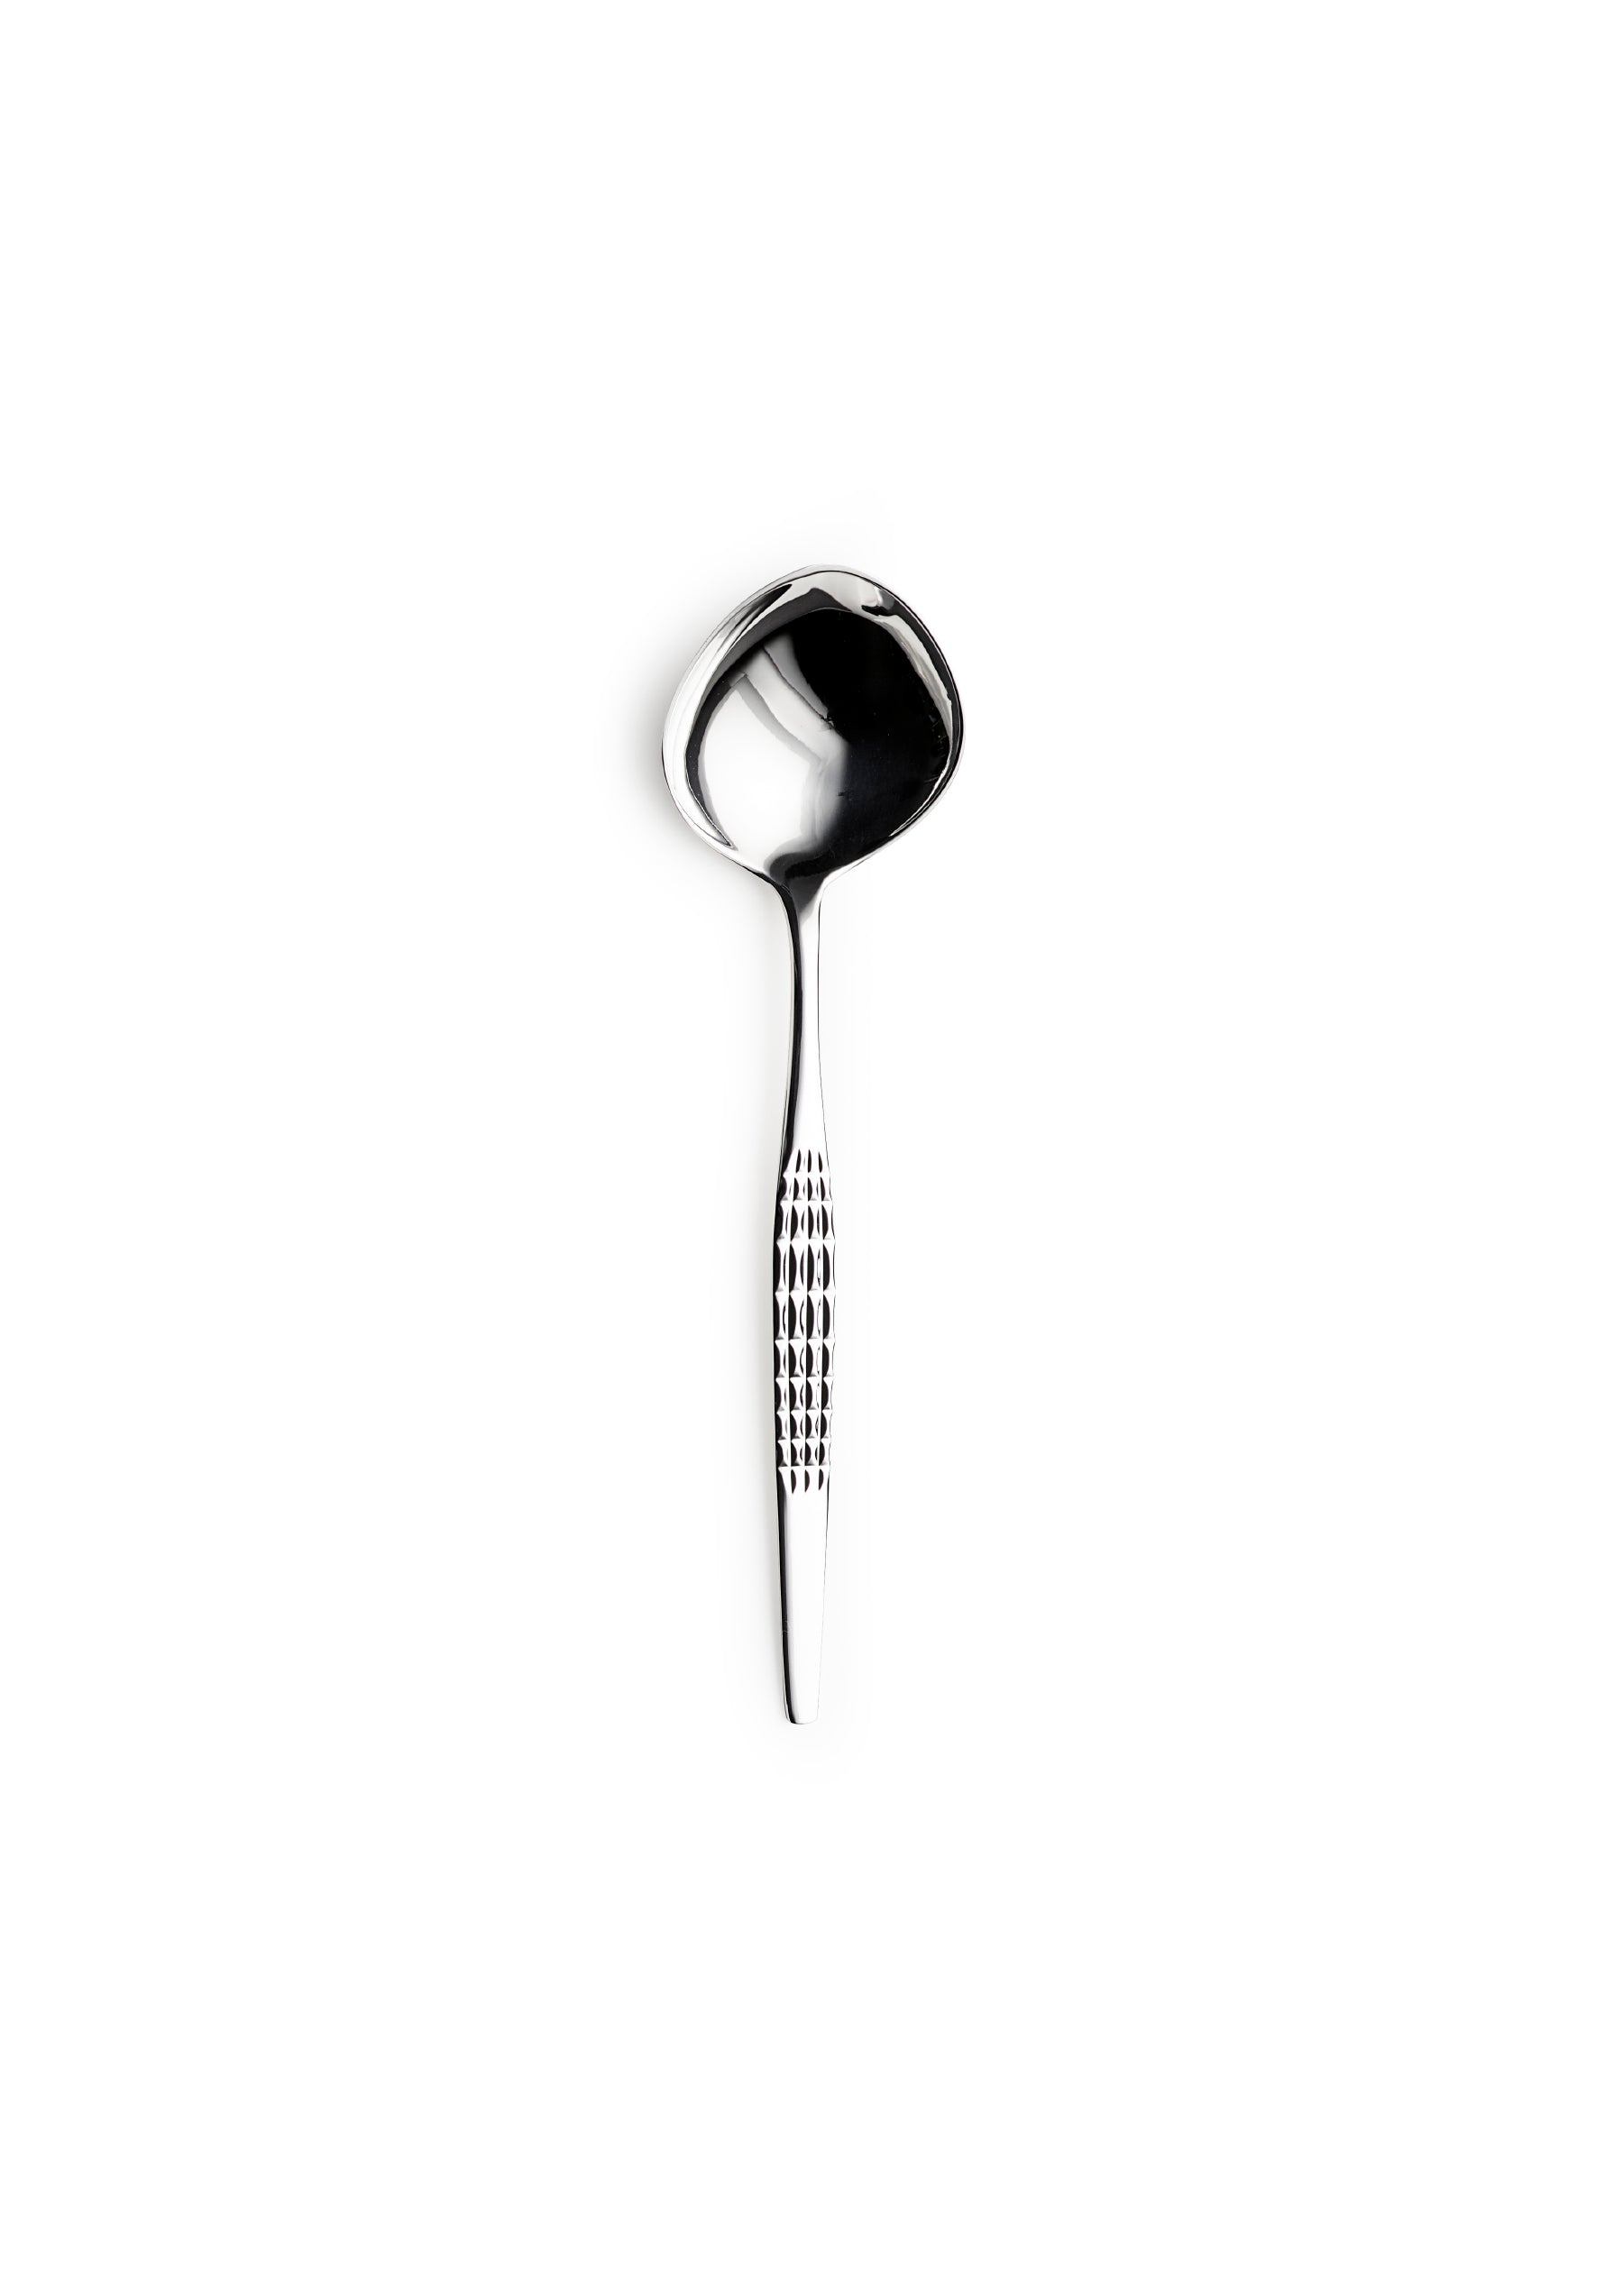 Faceted jam spoon